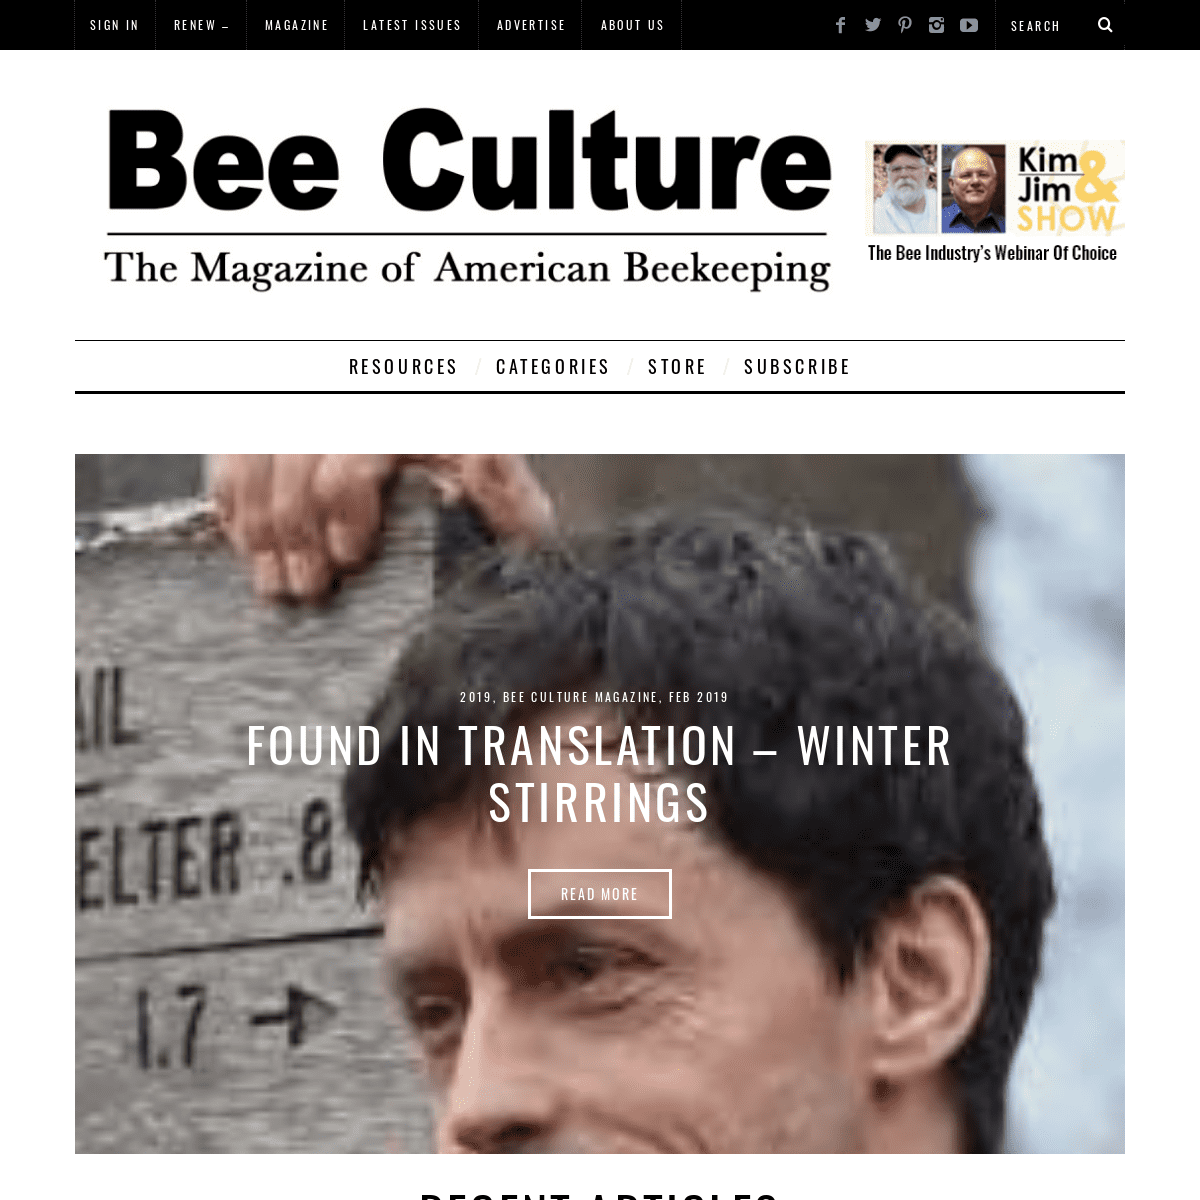 A complete backup of beeculture.com